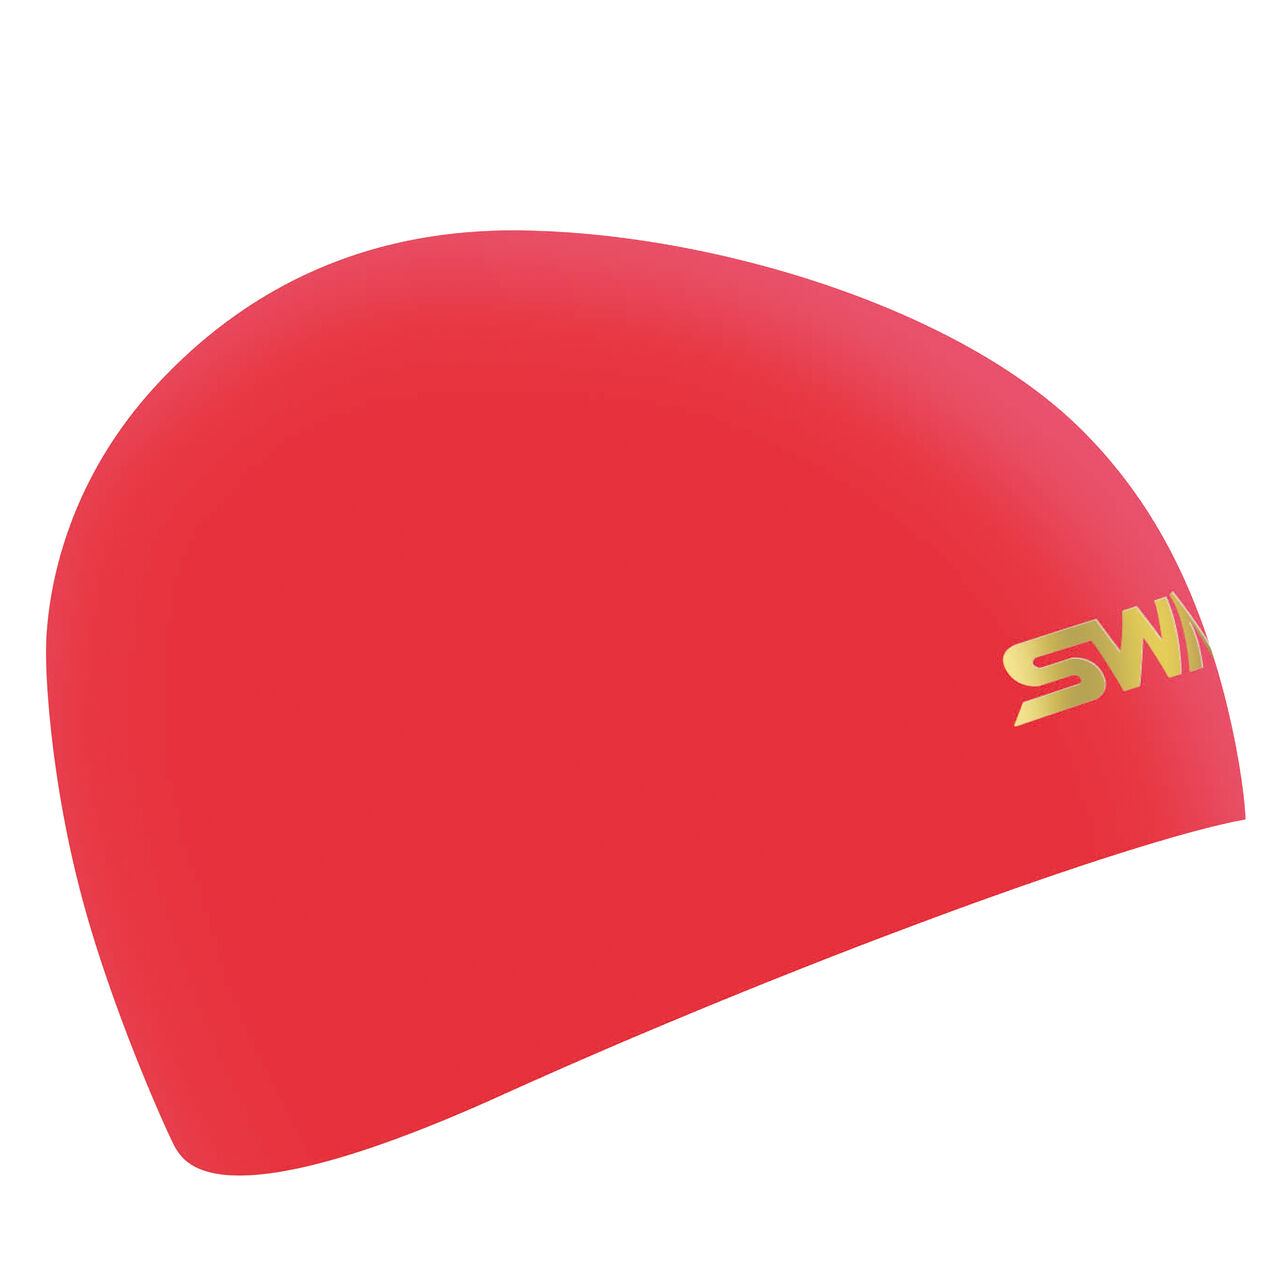 SA-10S Red silicone swim cap,Opt3, large image number 0